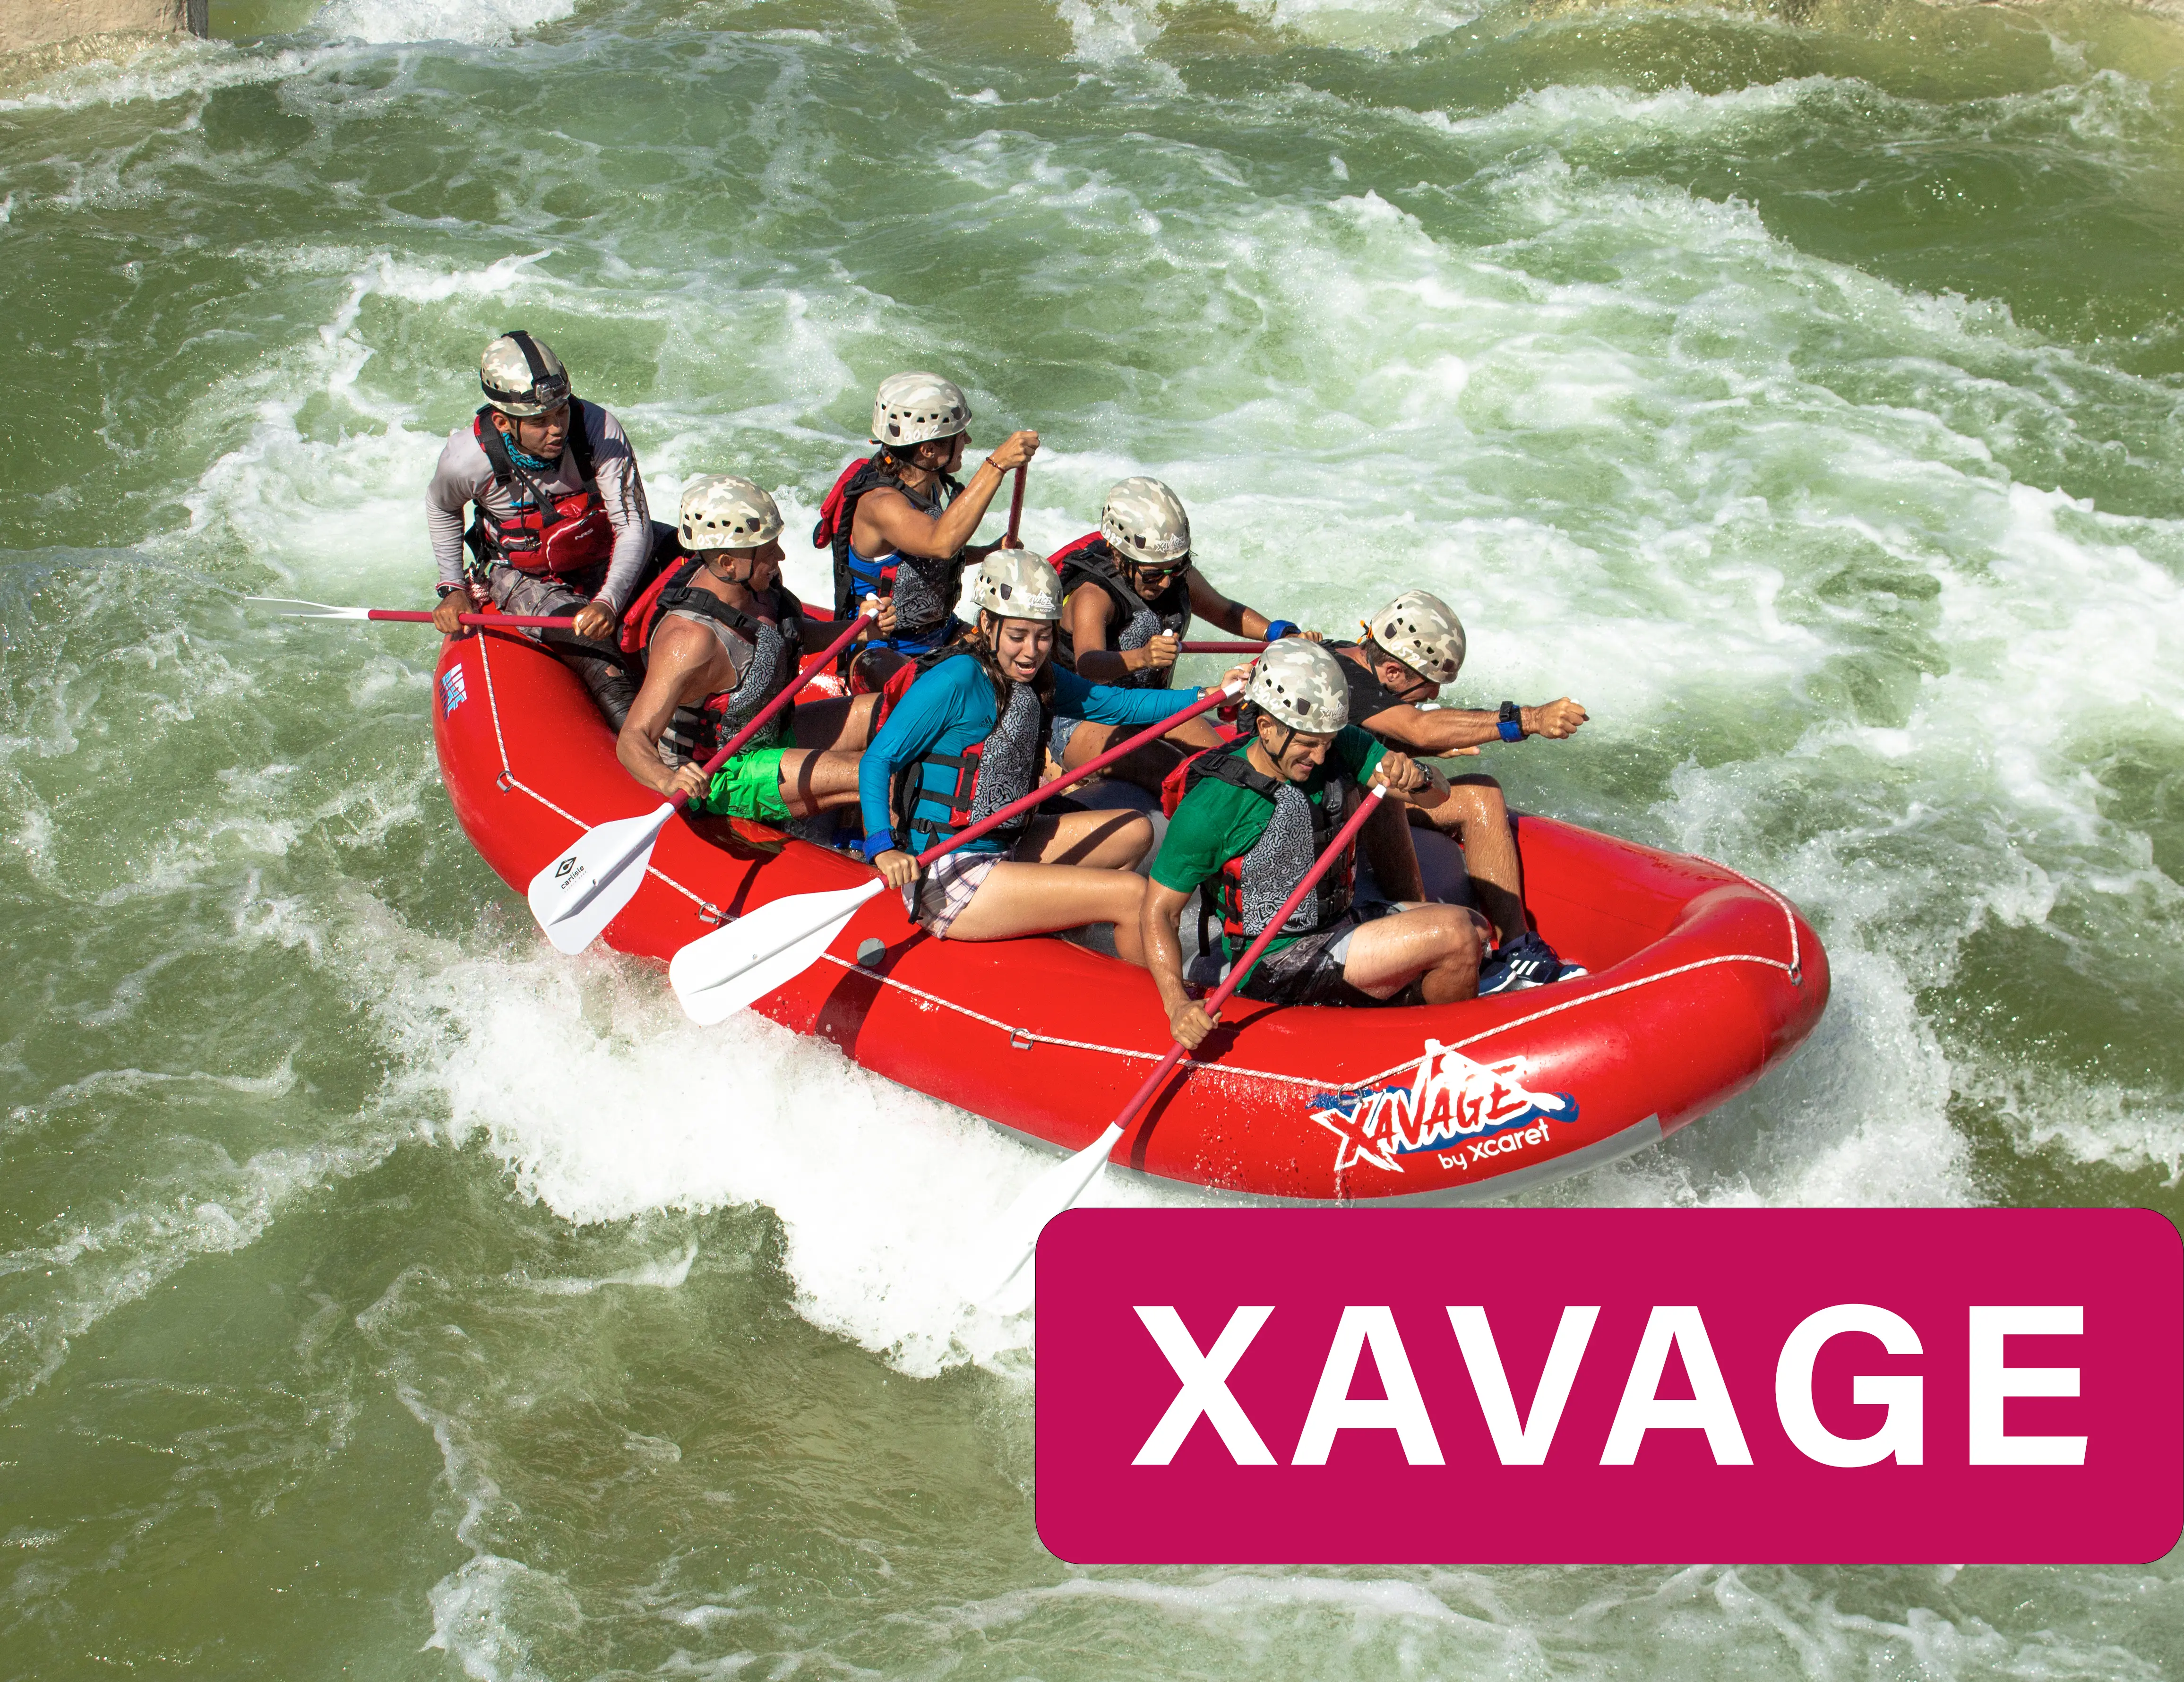 Rafting in Xavage Park the adventure park by Xcaret in the Riviera Maya